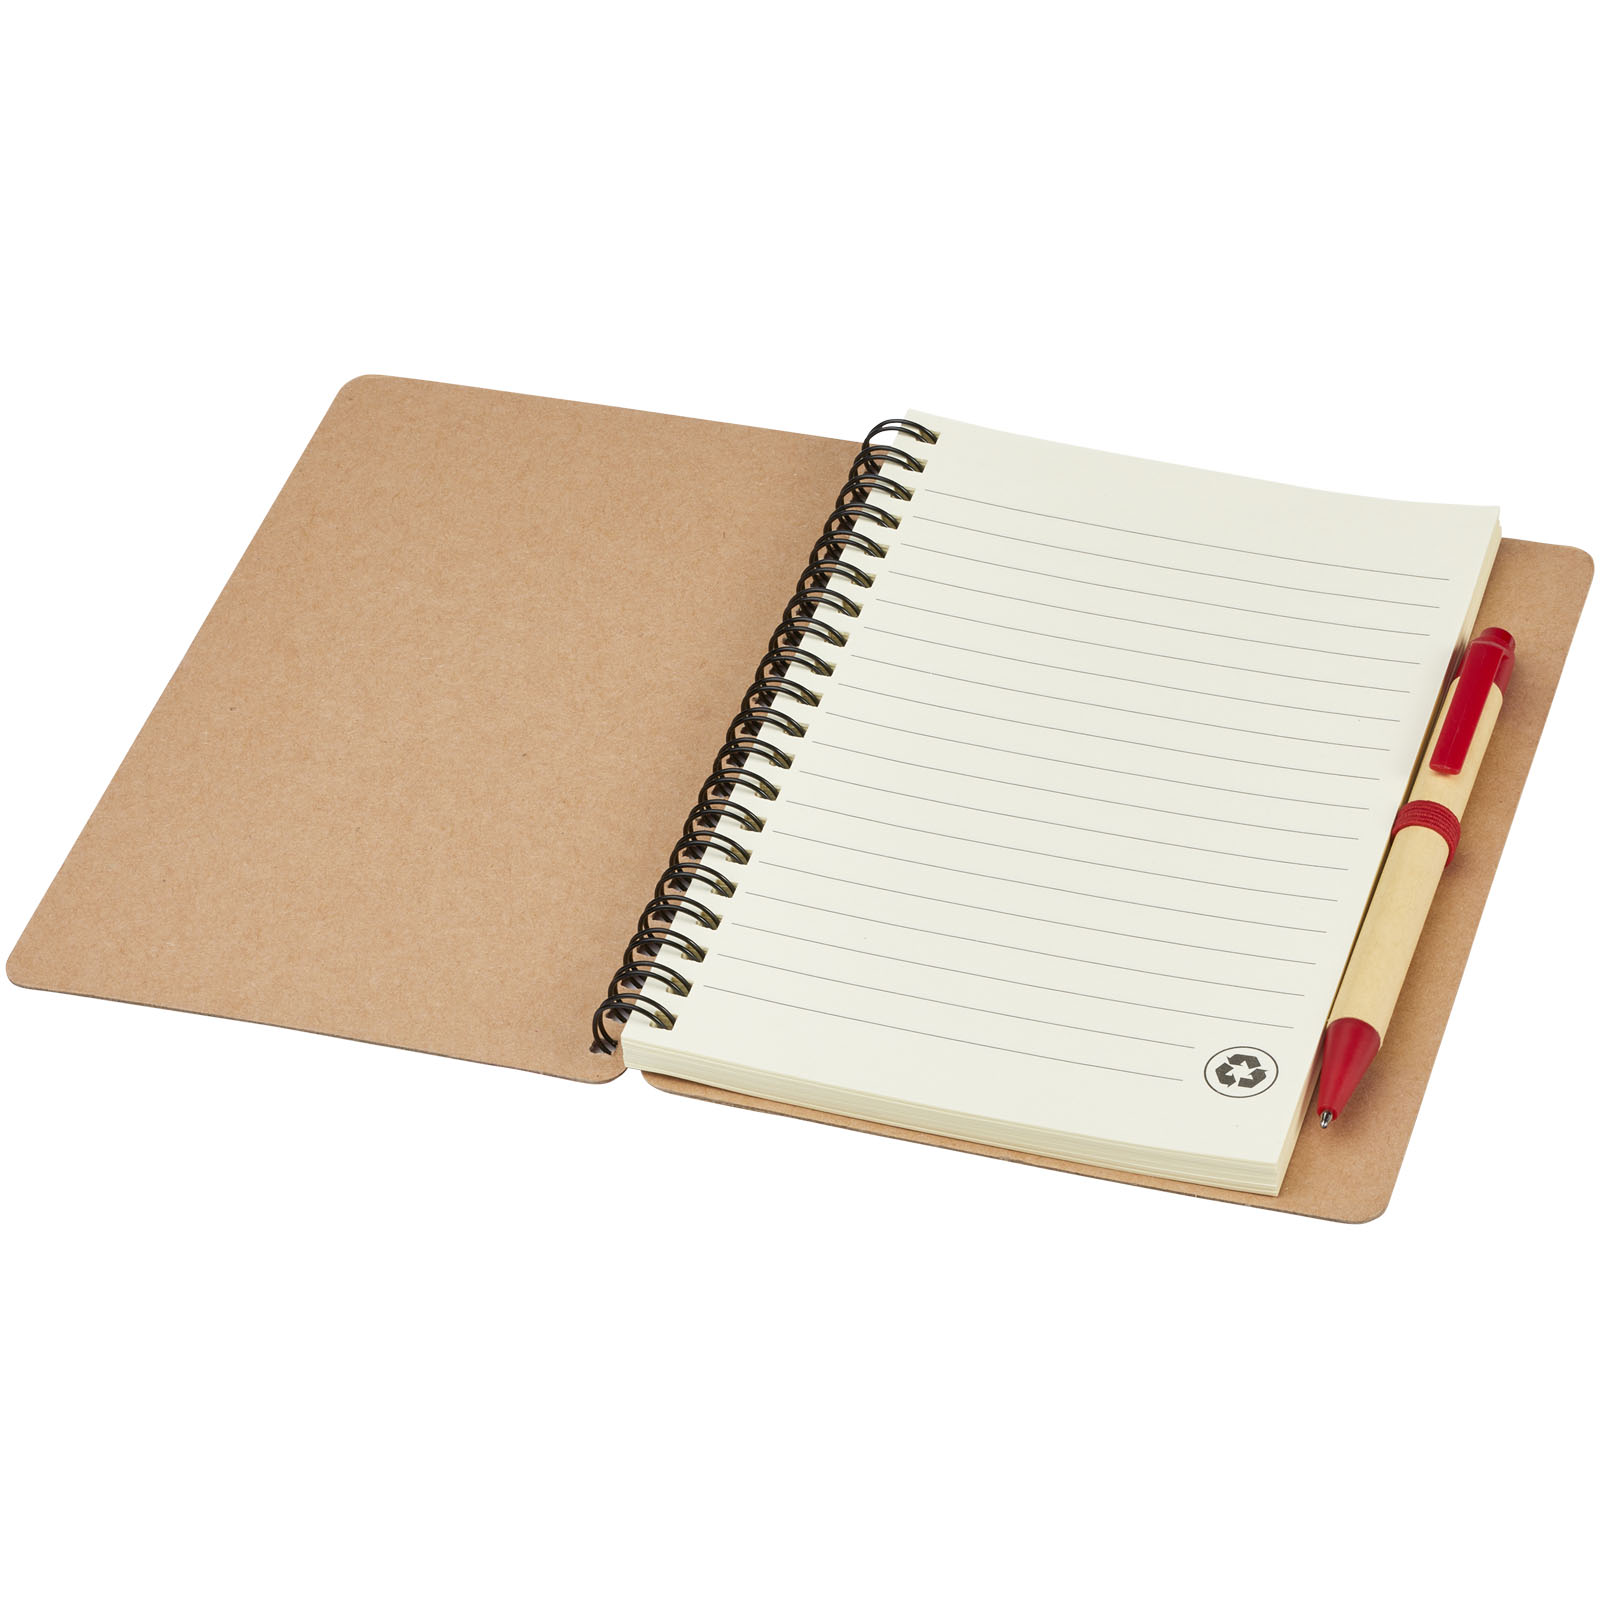 Advertising Hard cover notebooks - Priestly recycled notebook with pen - 3